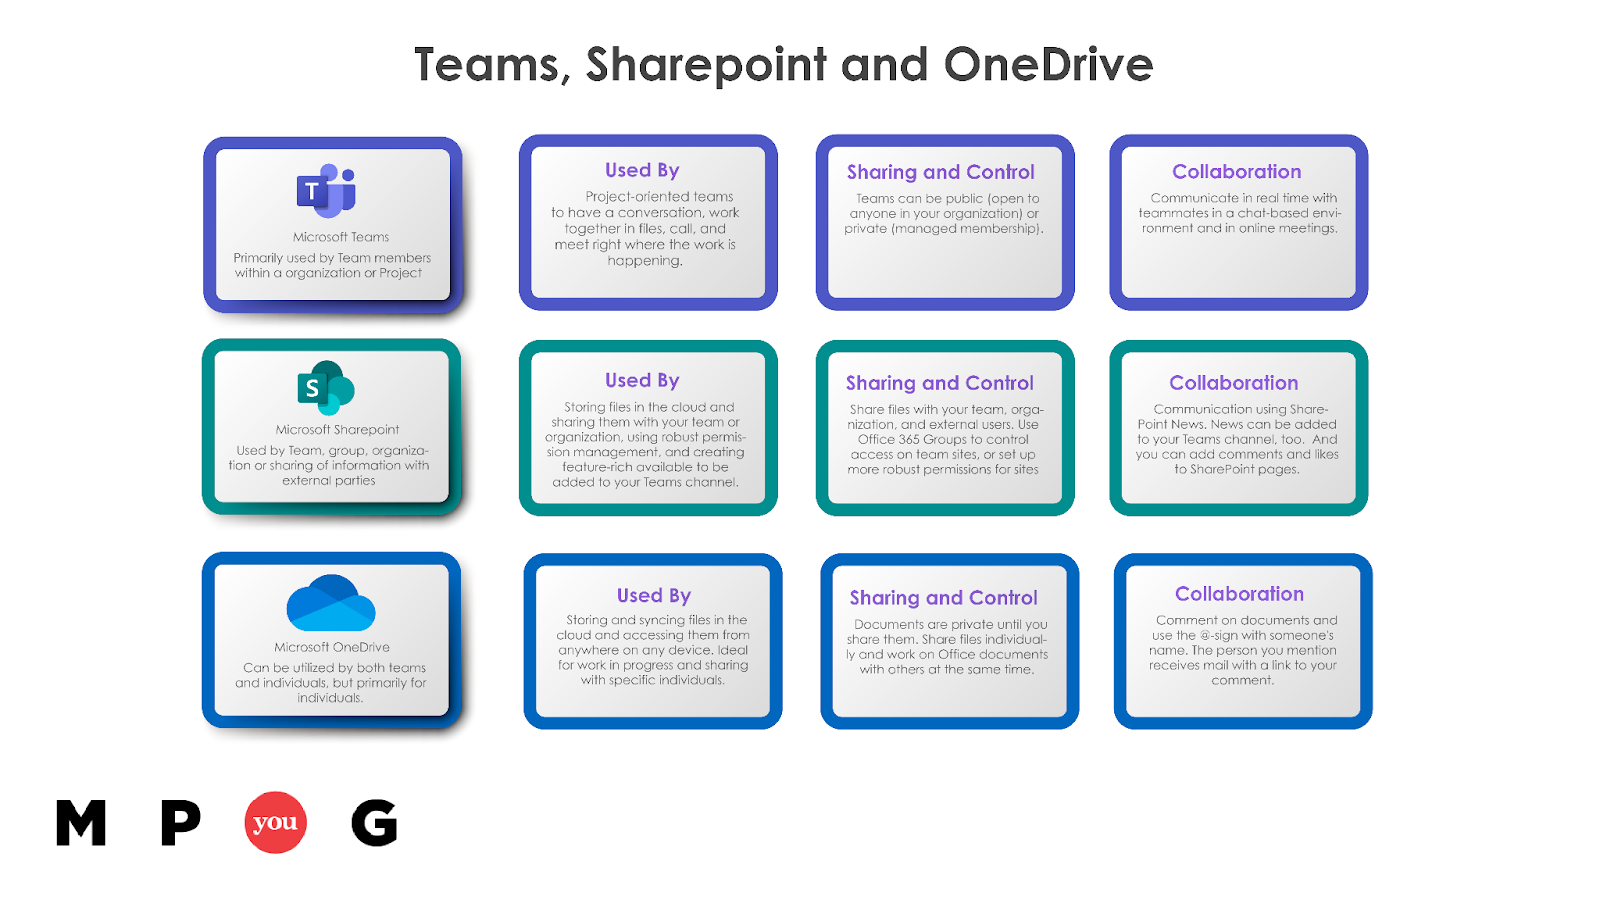 Features of Teams compared to Onedrive and Sharepoint